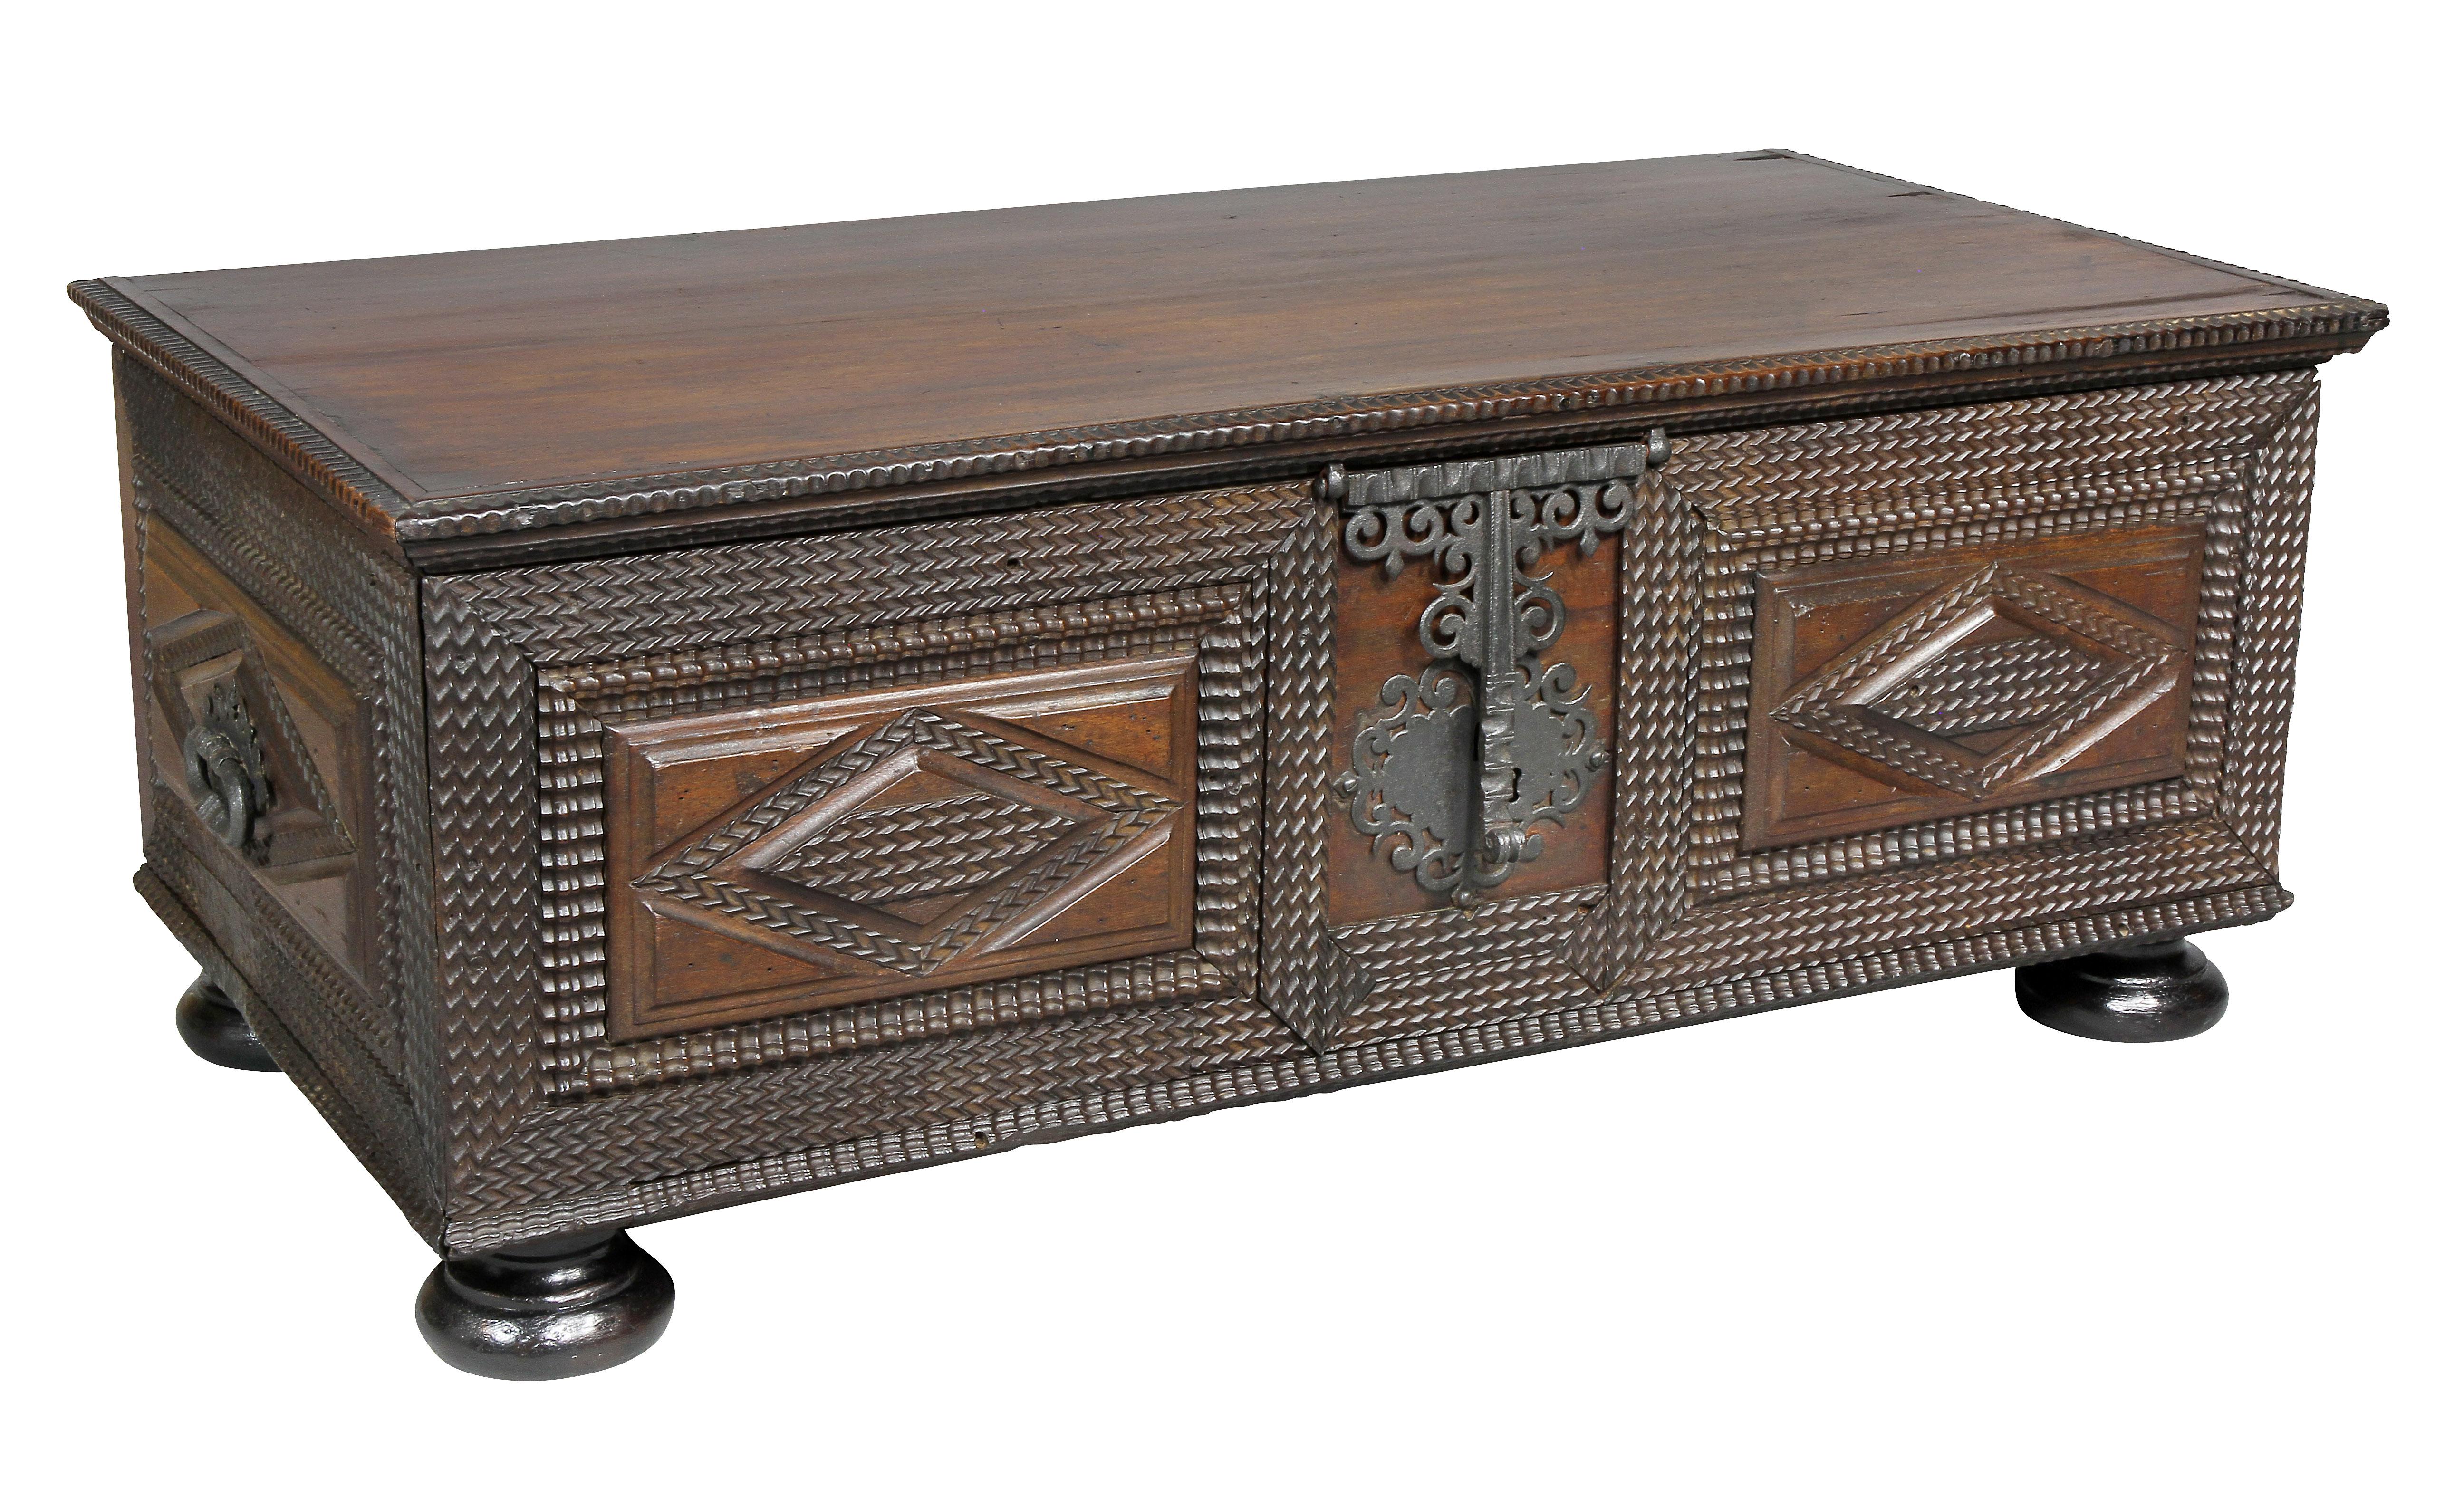 With rectangular hinged top over a case with two panels with diamond carved centers, elaborate wrought iron hinged latch and lock plate, side handles with carved diamond shape panels, bun feet.